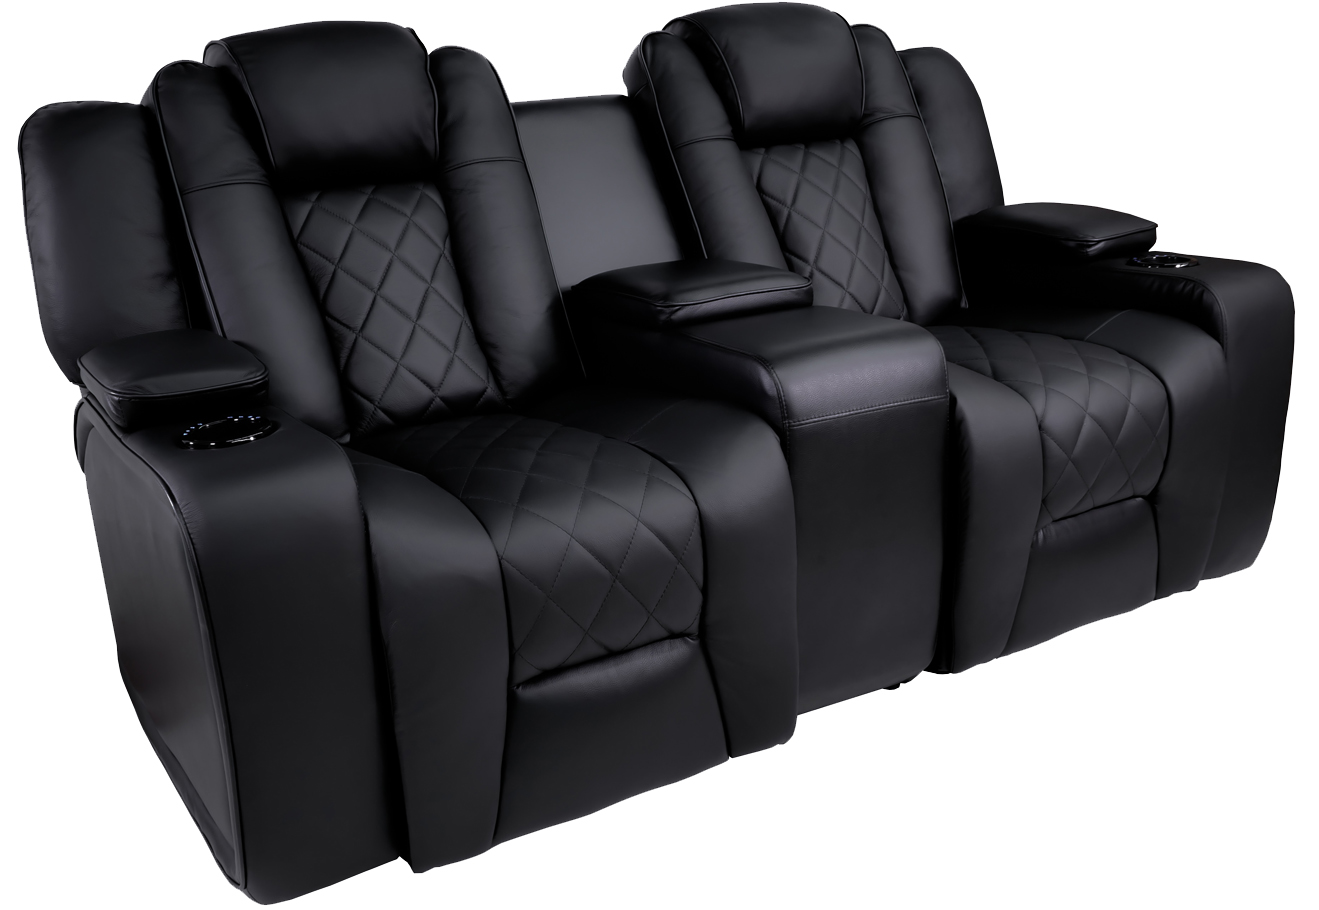 leather motorized recliner sofa